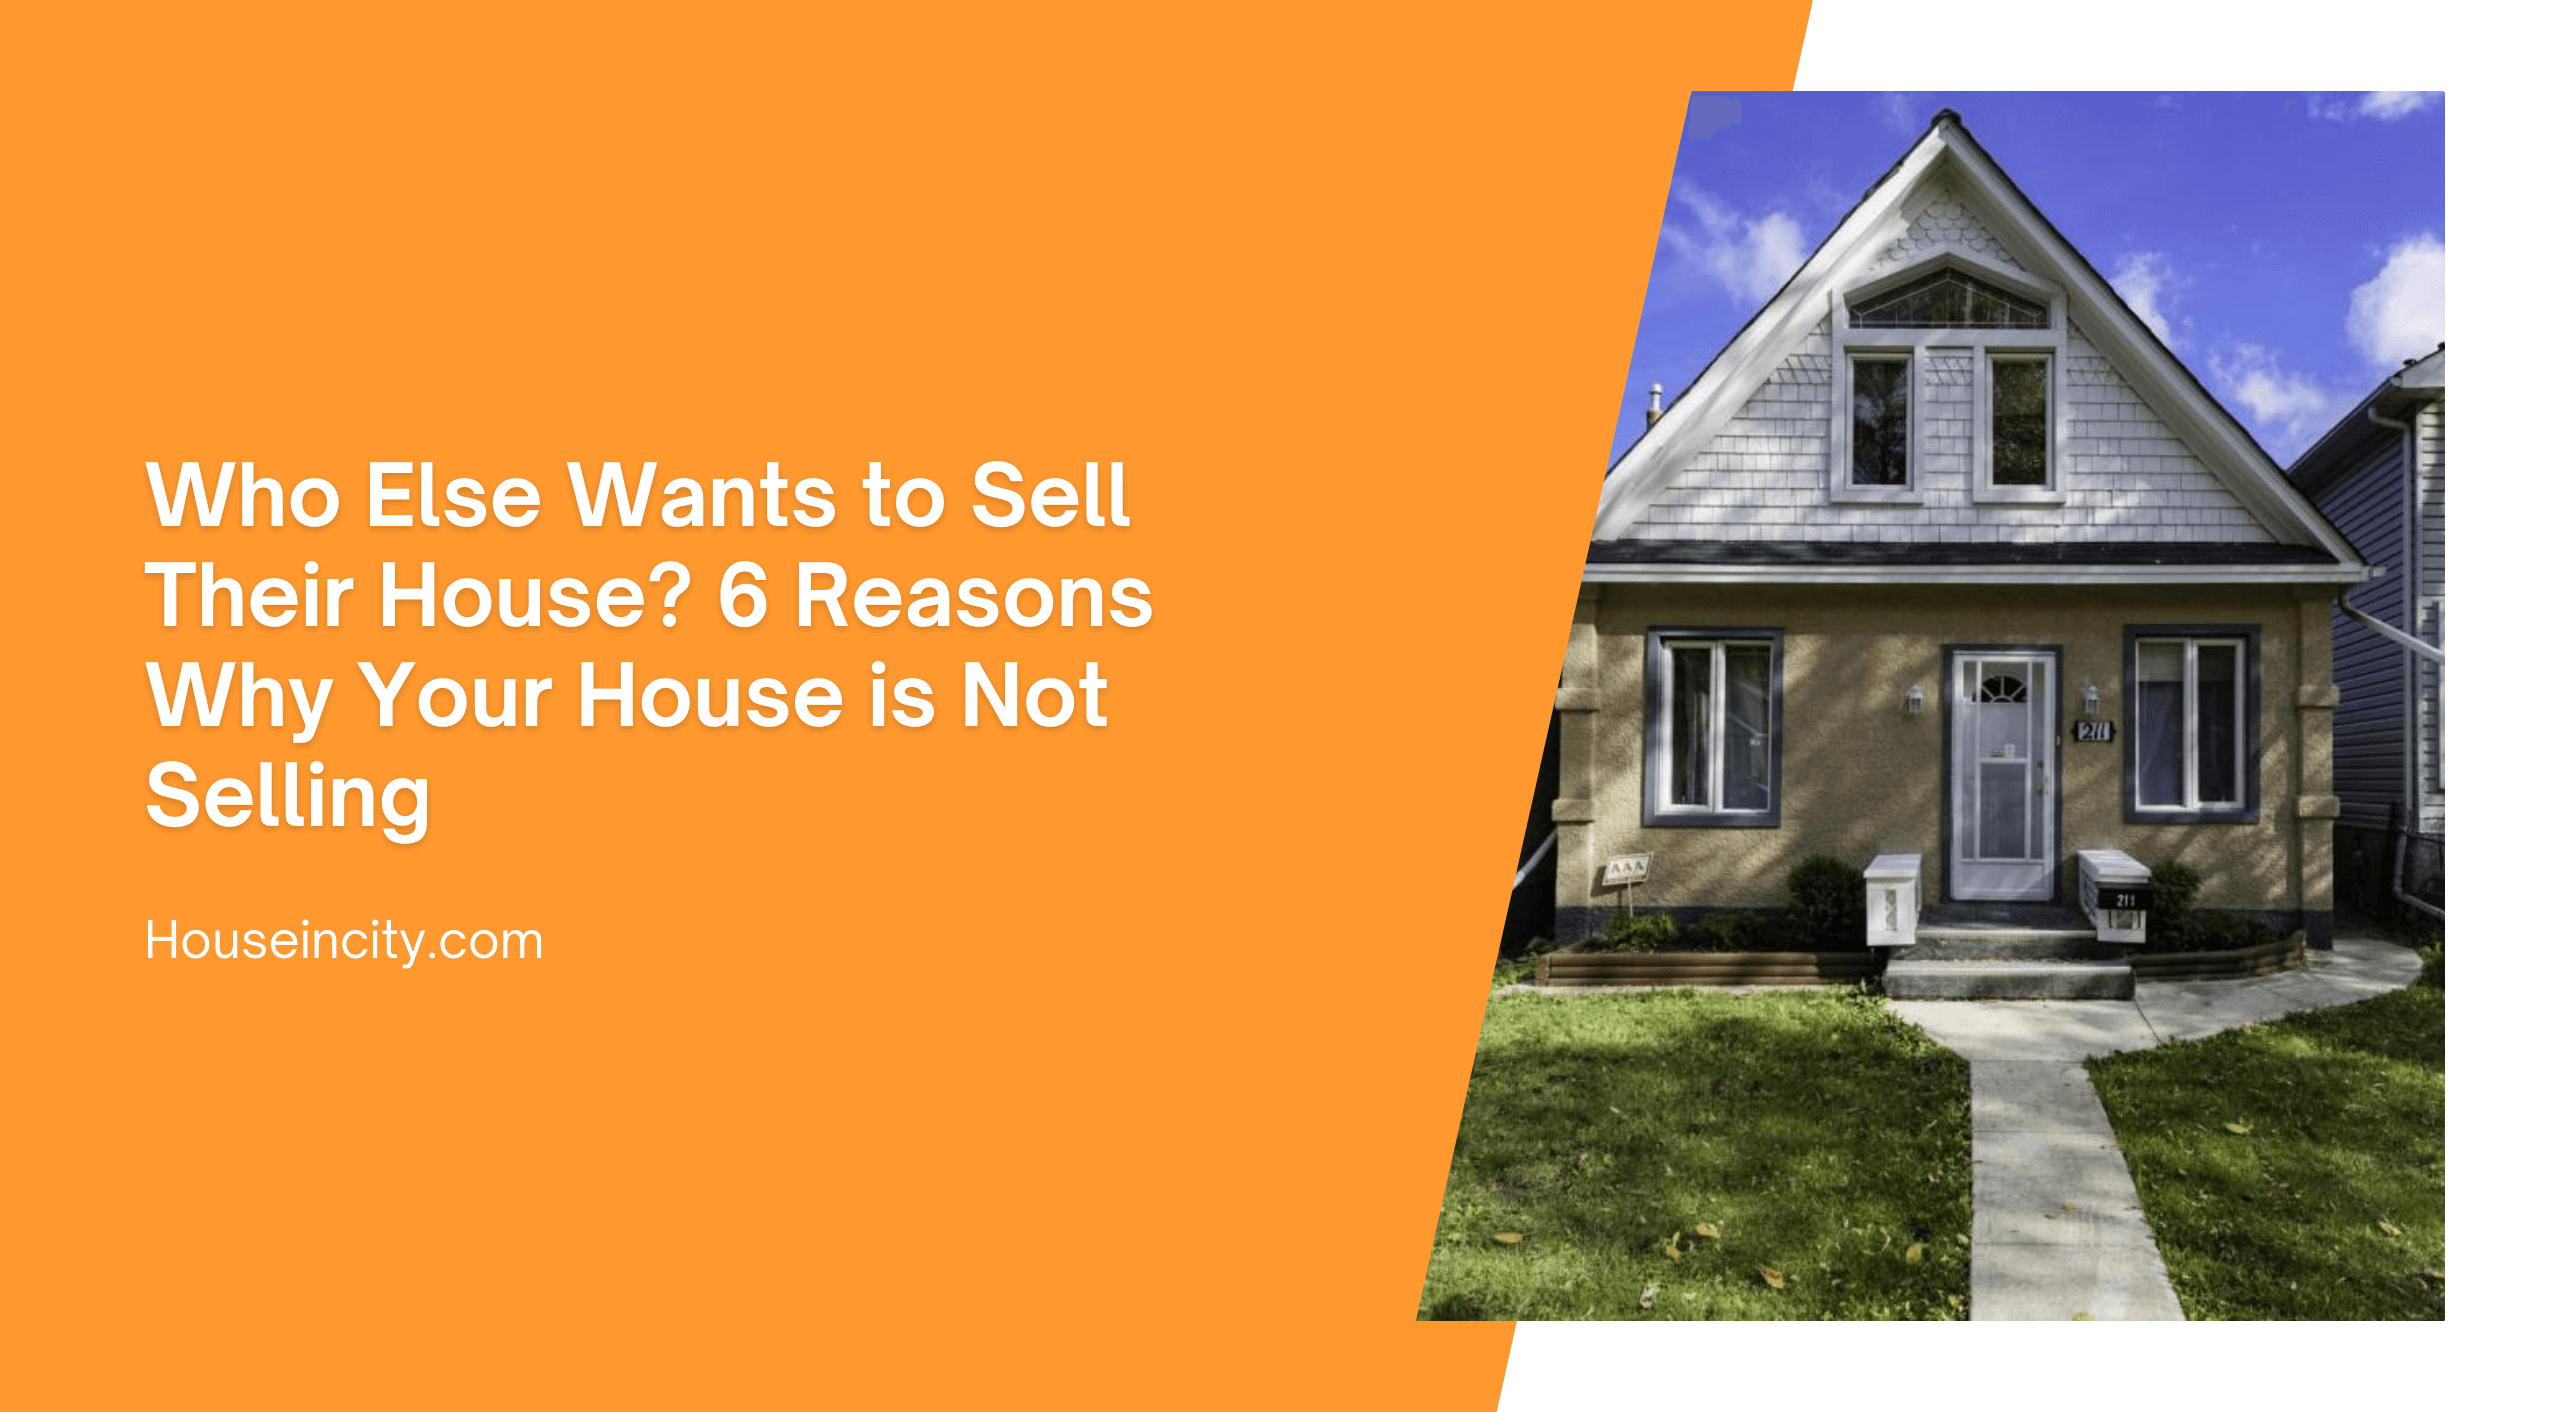 Who Else Wants to Sell Their House? 6 Reasons Why Your House is Not Selling